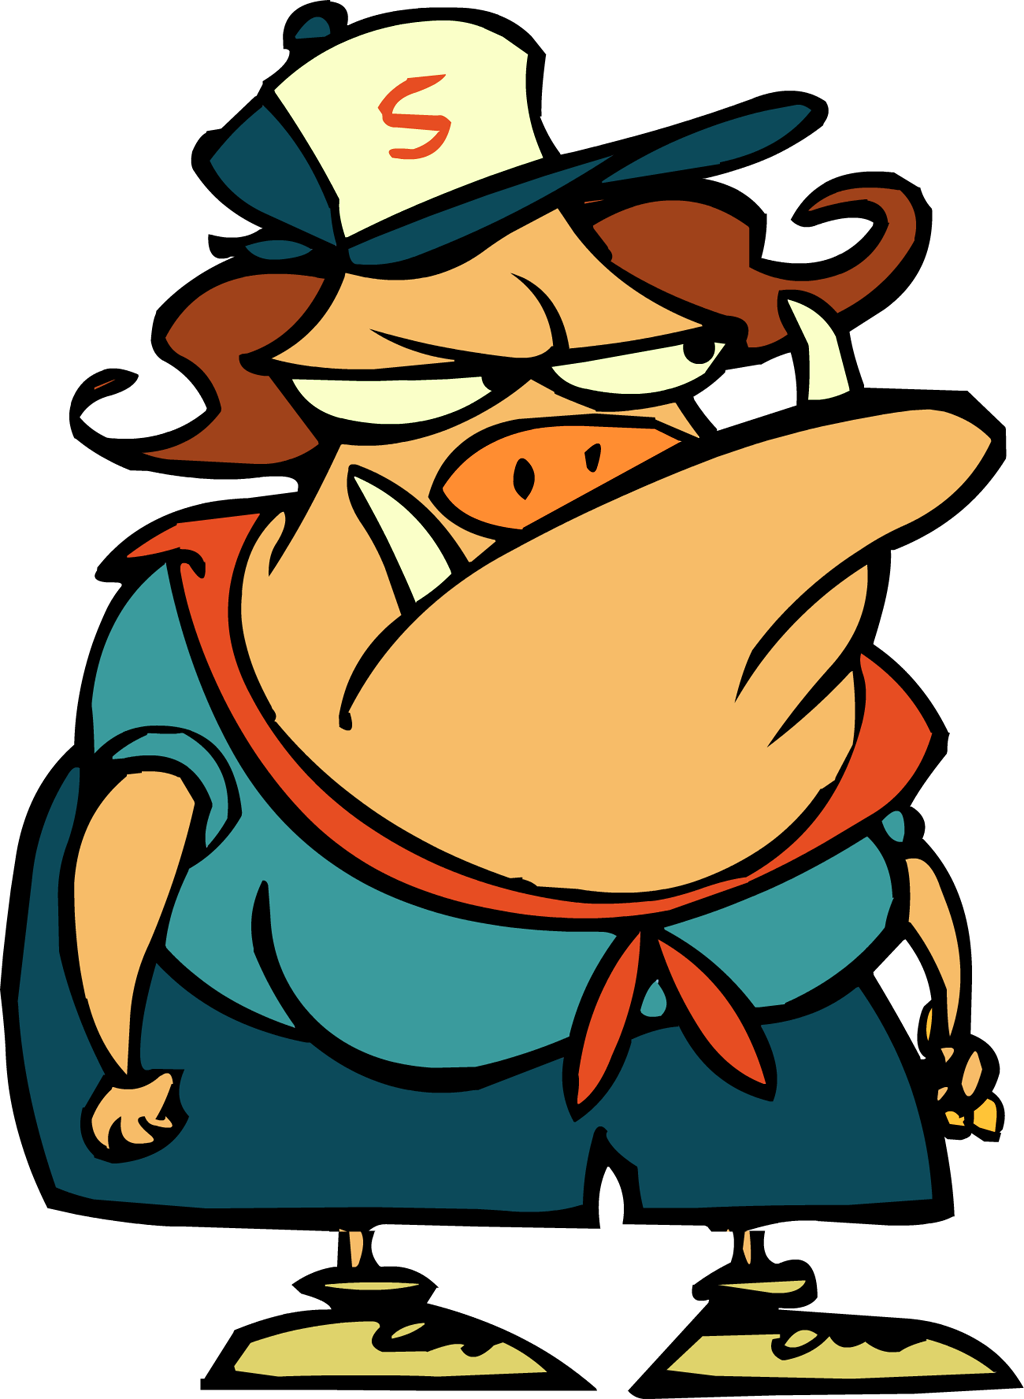 Ms mucus camp lazlo. Kidney clipart angry